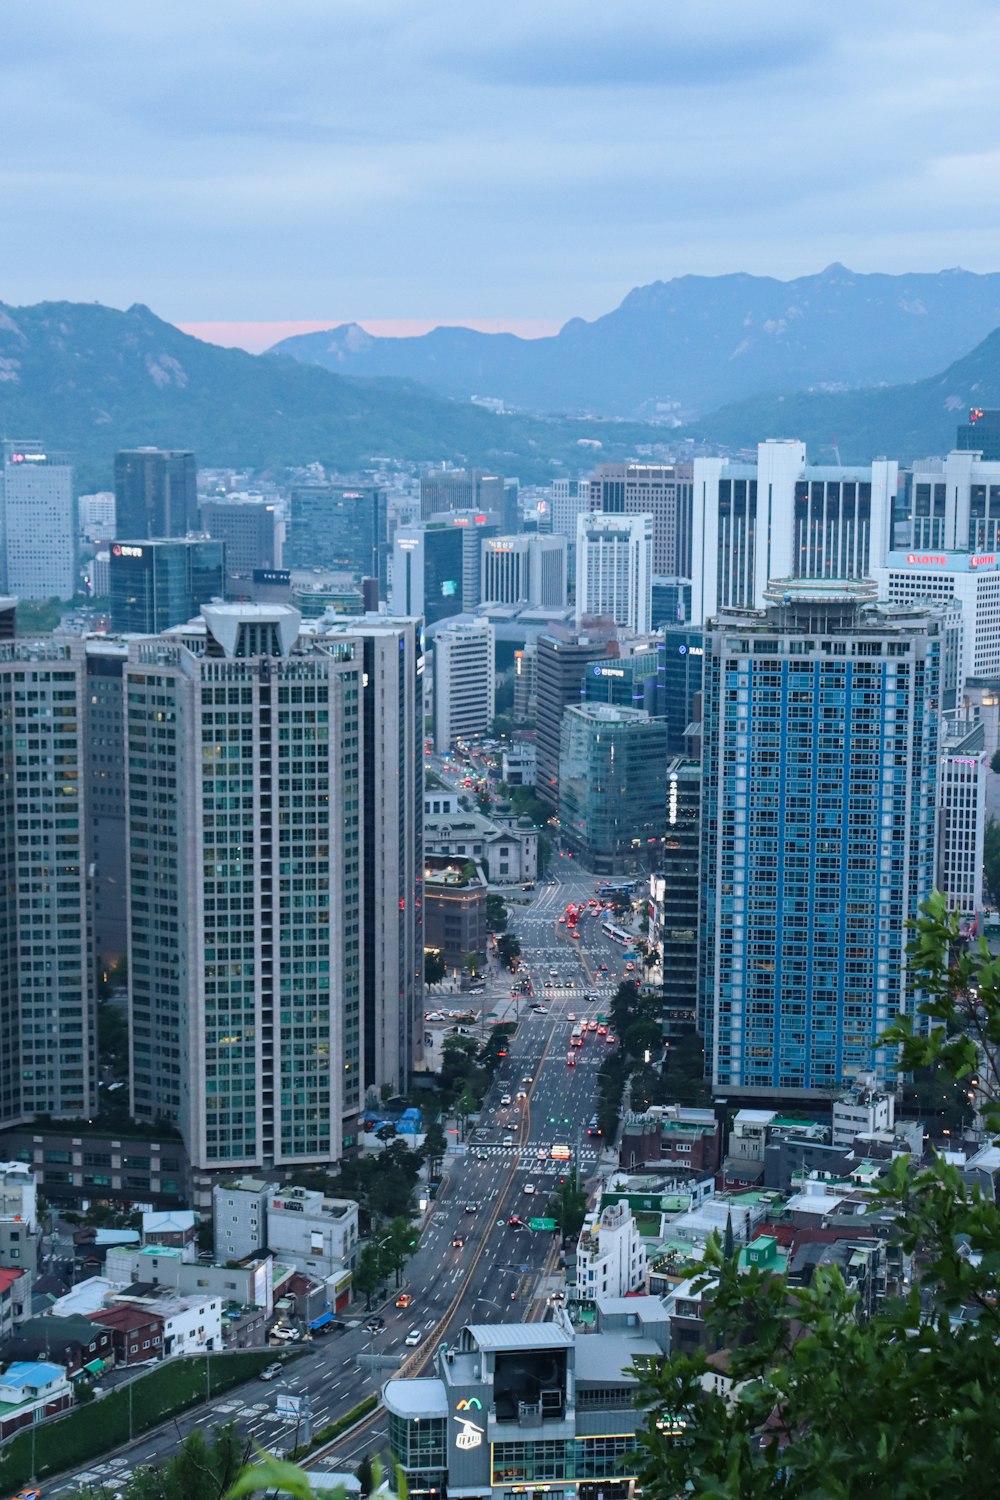 a view of a city with tall buildings and mountains in the background